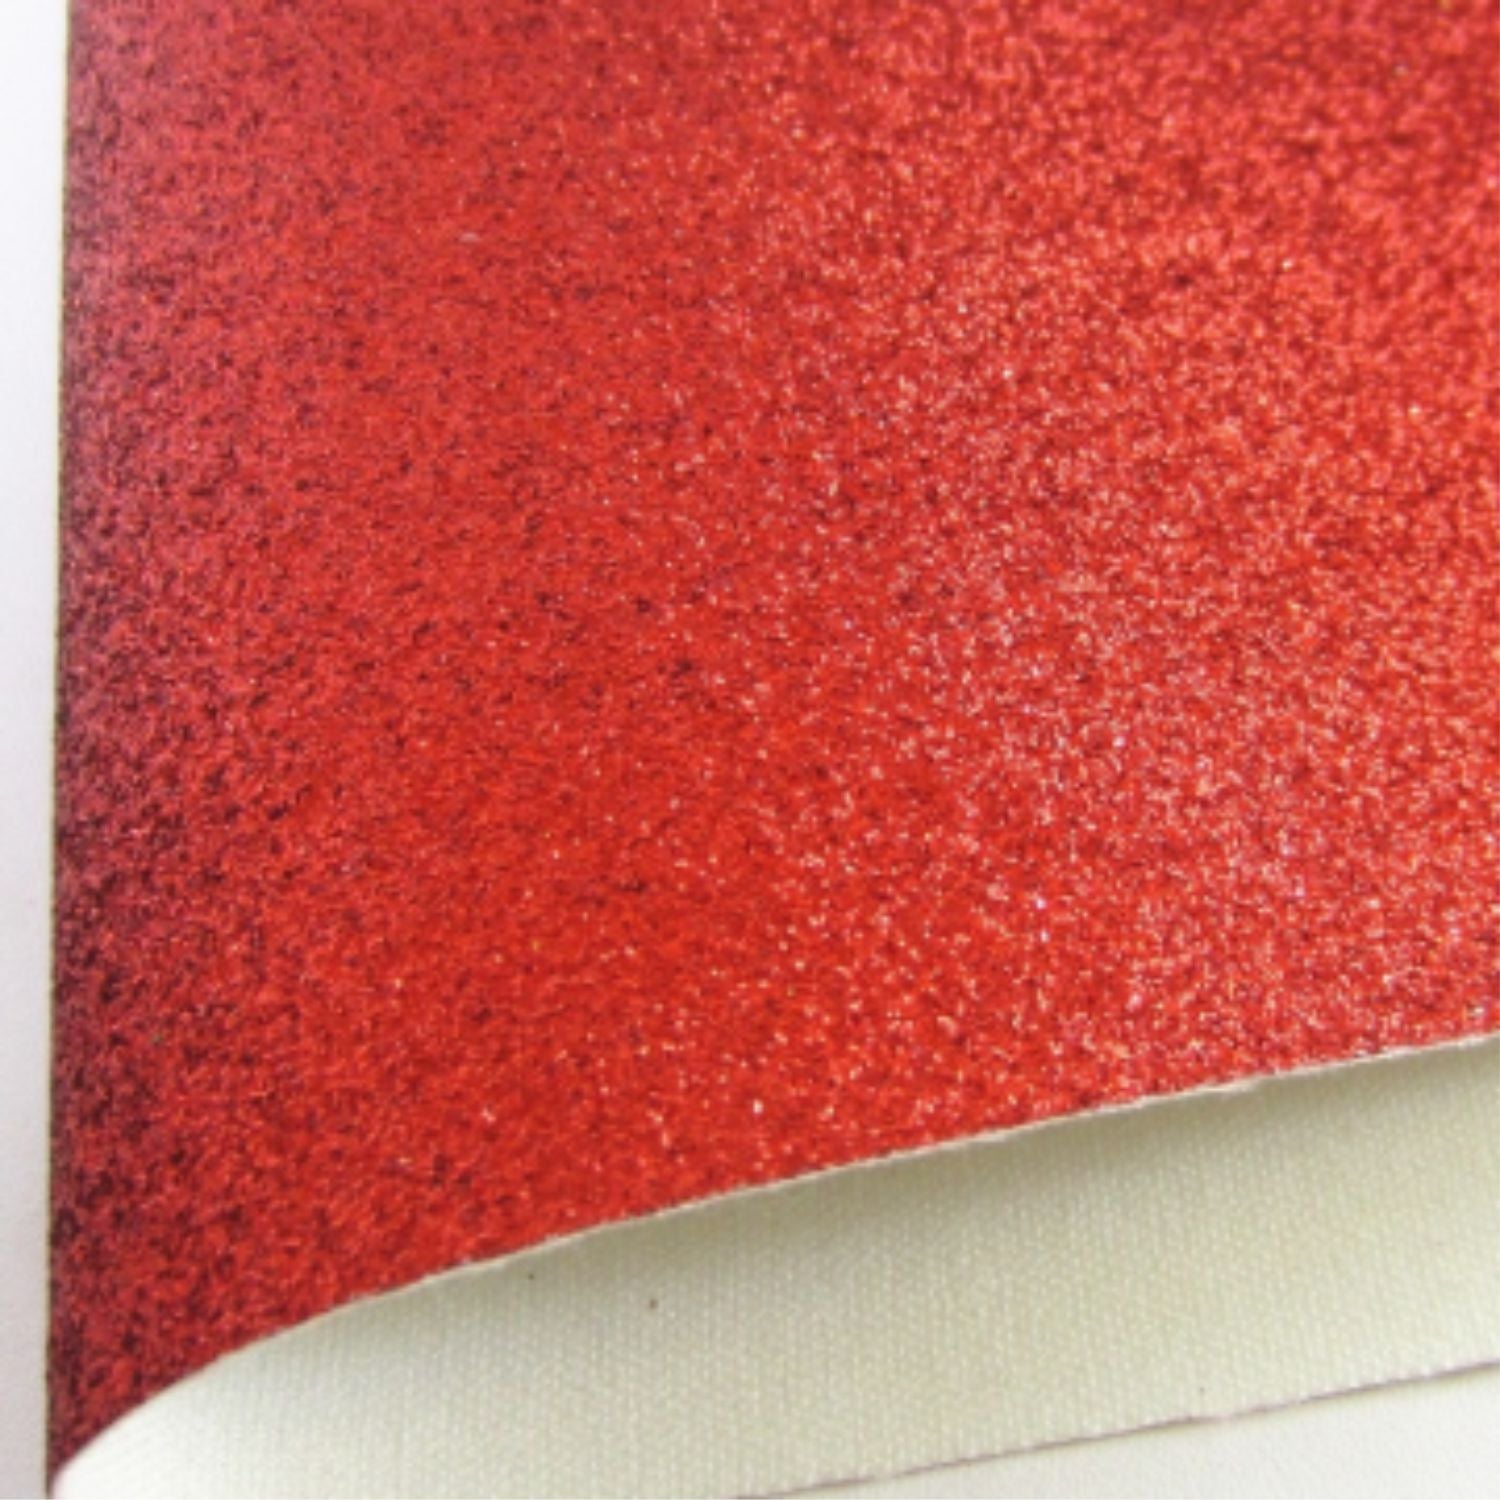 Red Fine Glitter Fabric Synthetic Faux PU Leather 11.75in x 12in Sheets - CraftCutterSupply.com